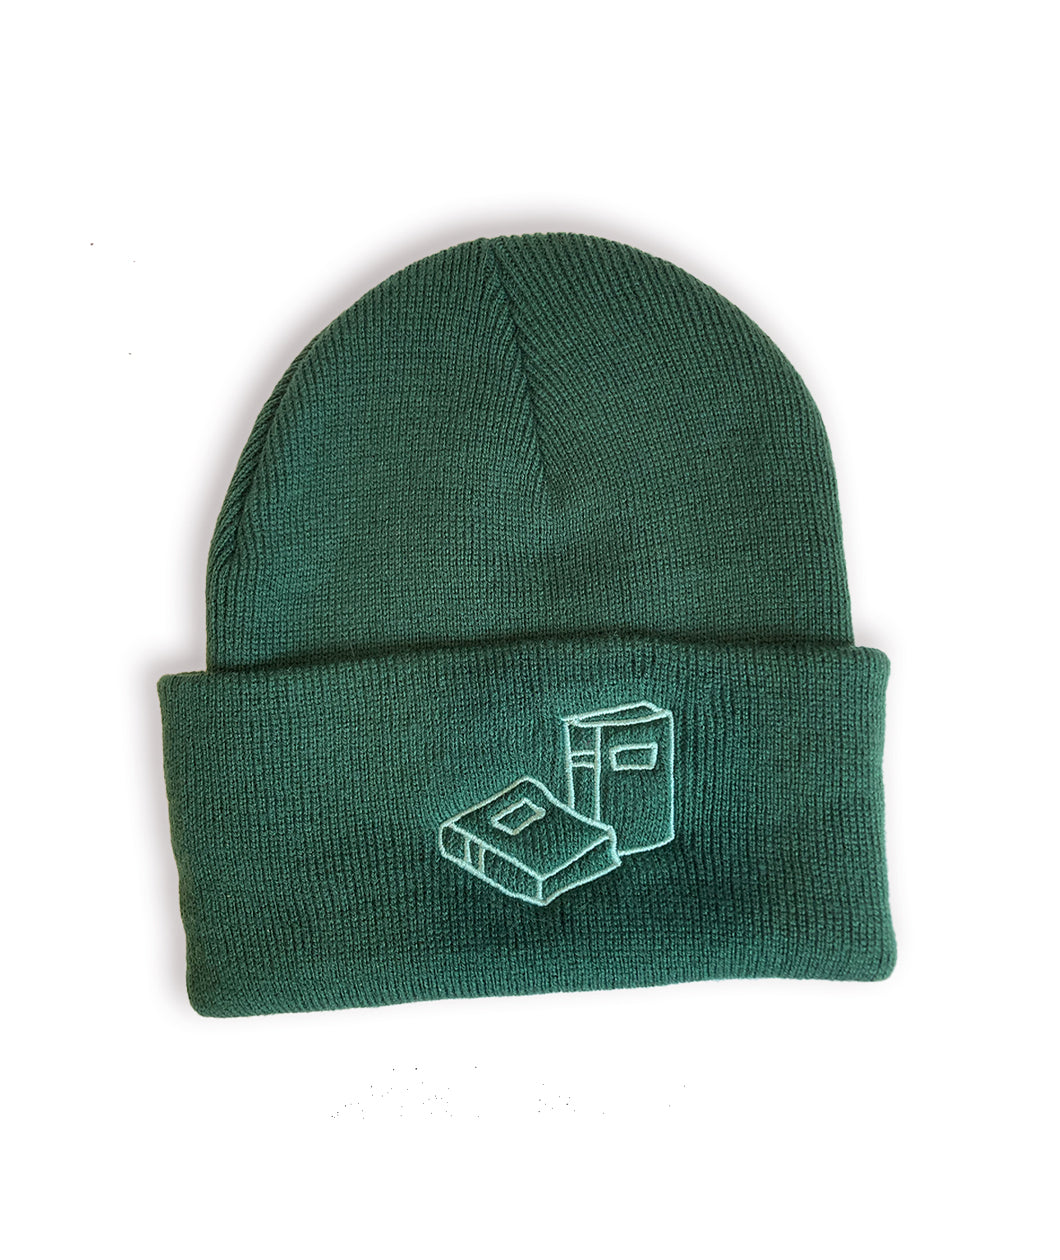 The Forest version of the Books Beanie embroidered with two books on the front of the cuff.